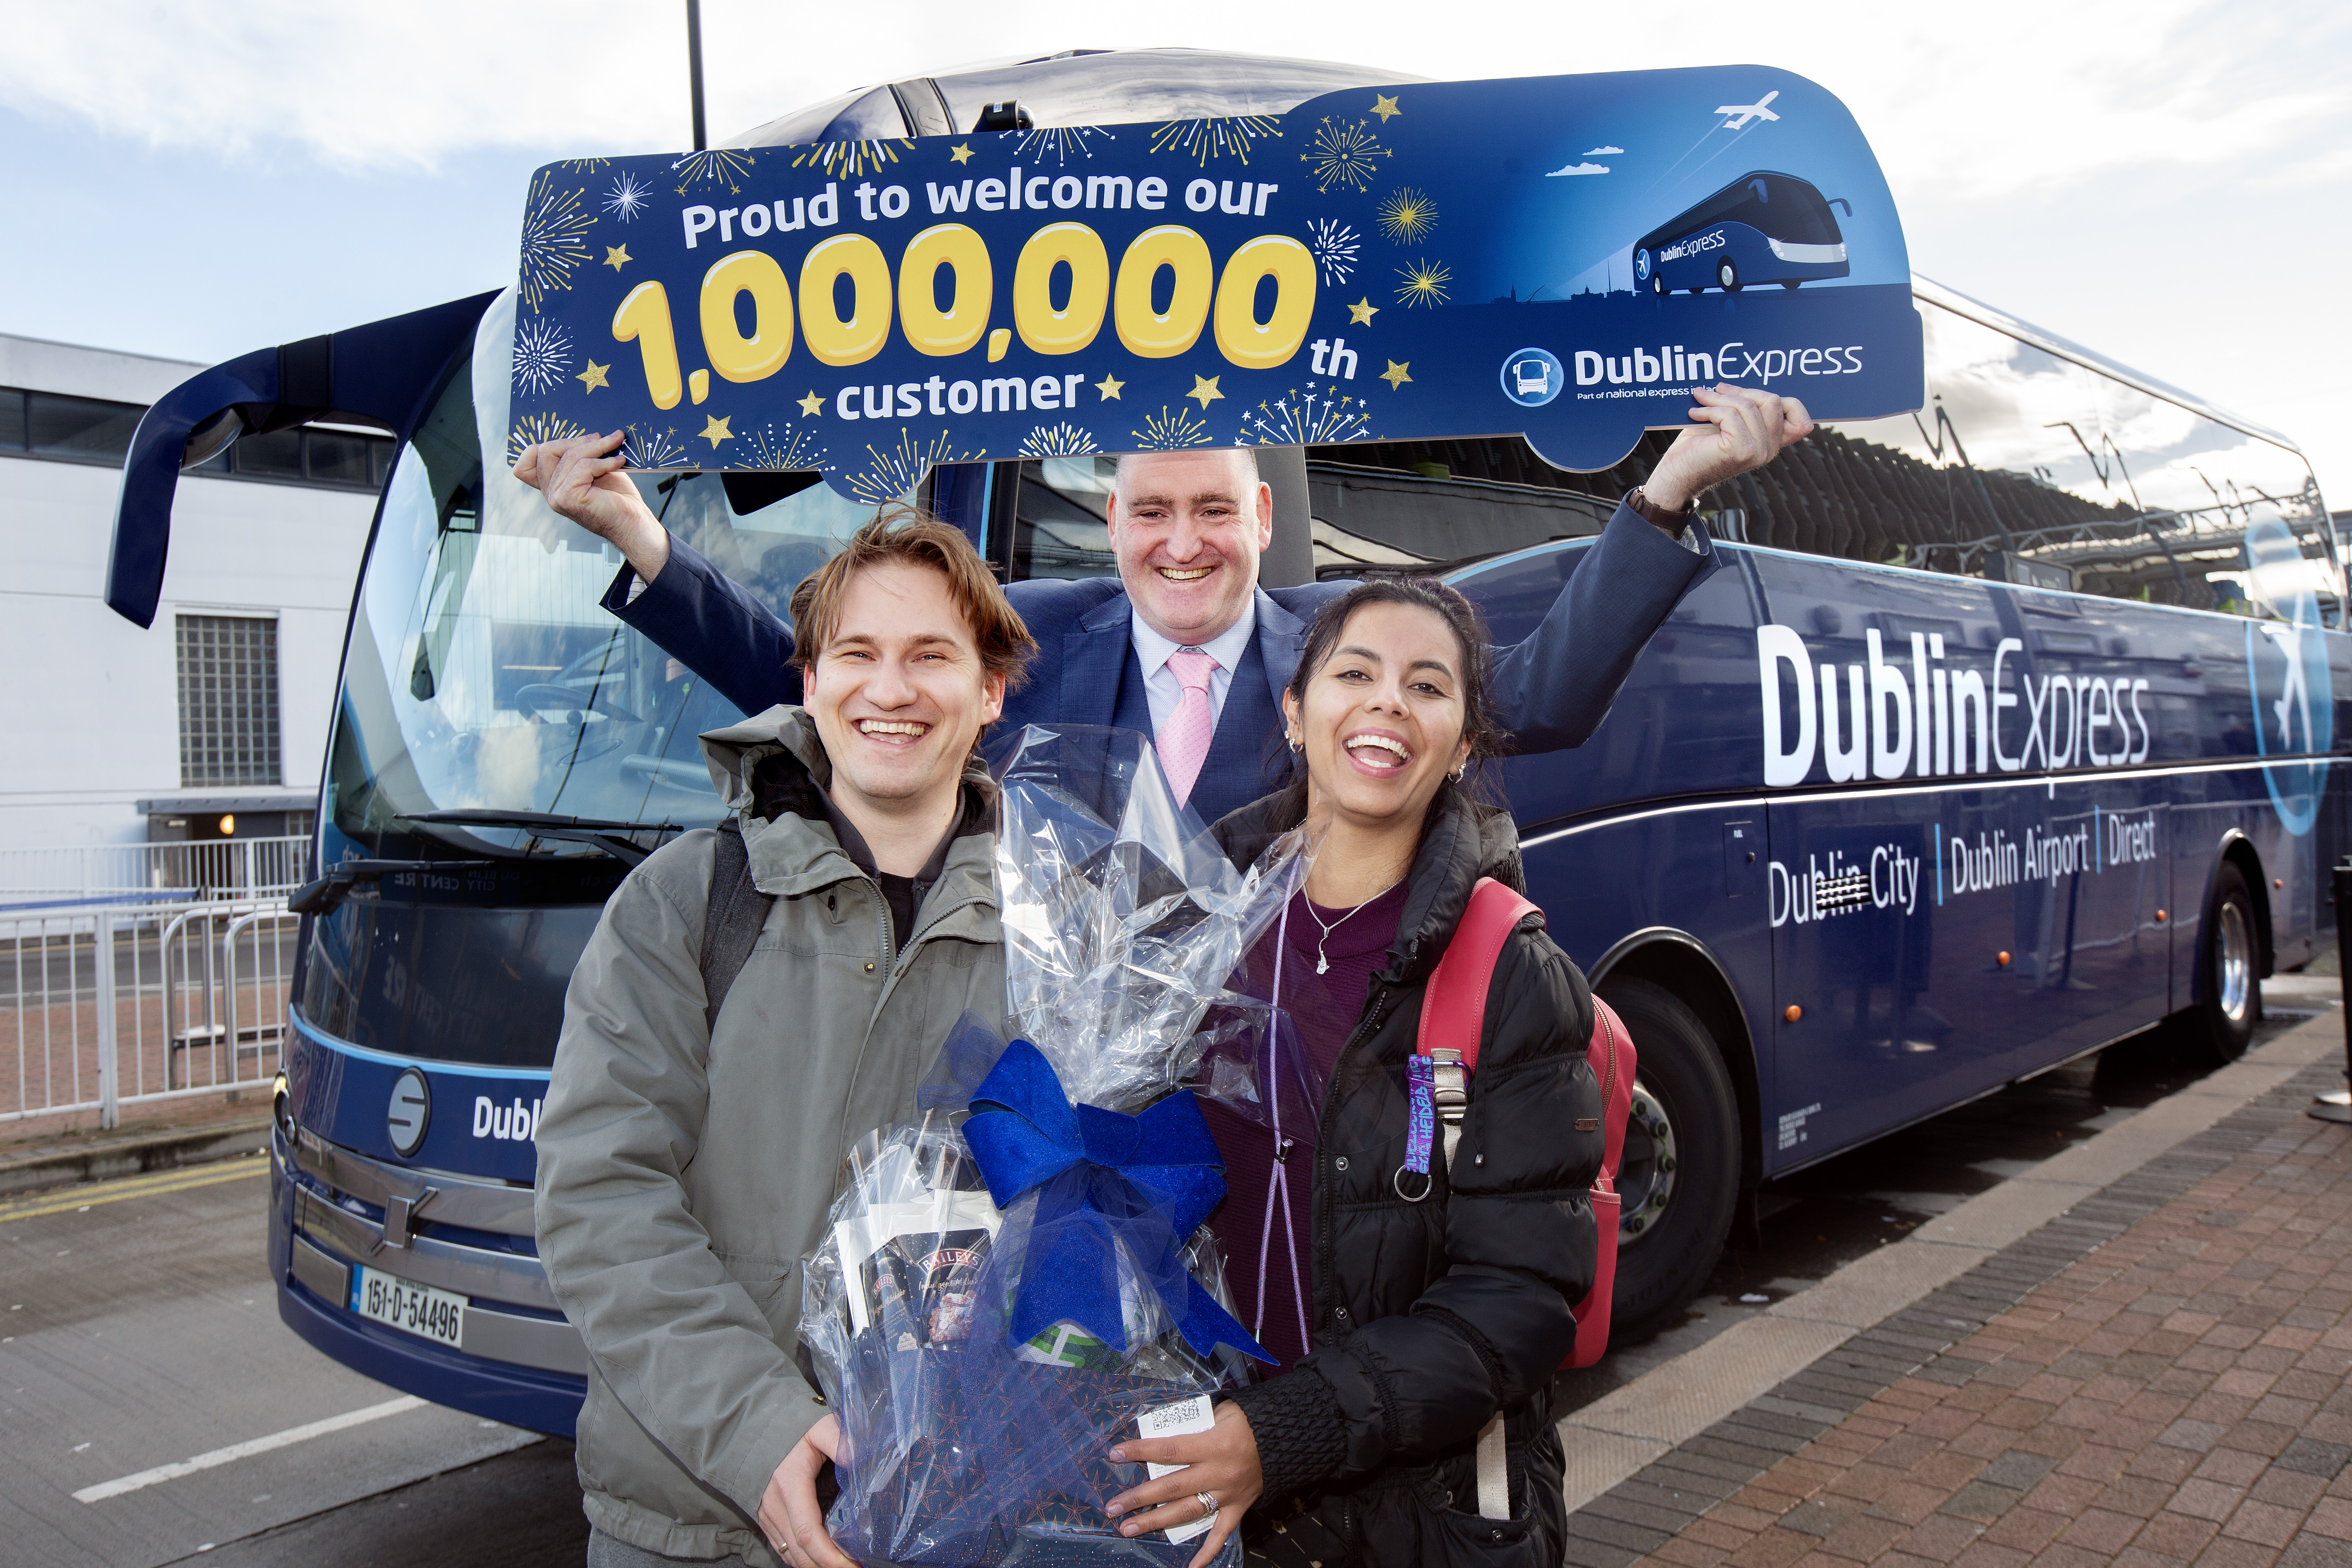 Dublin Express' Millionth Customer awarded with luxury hamper